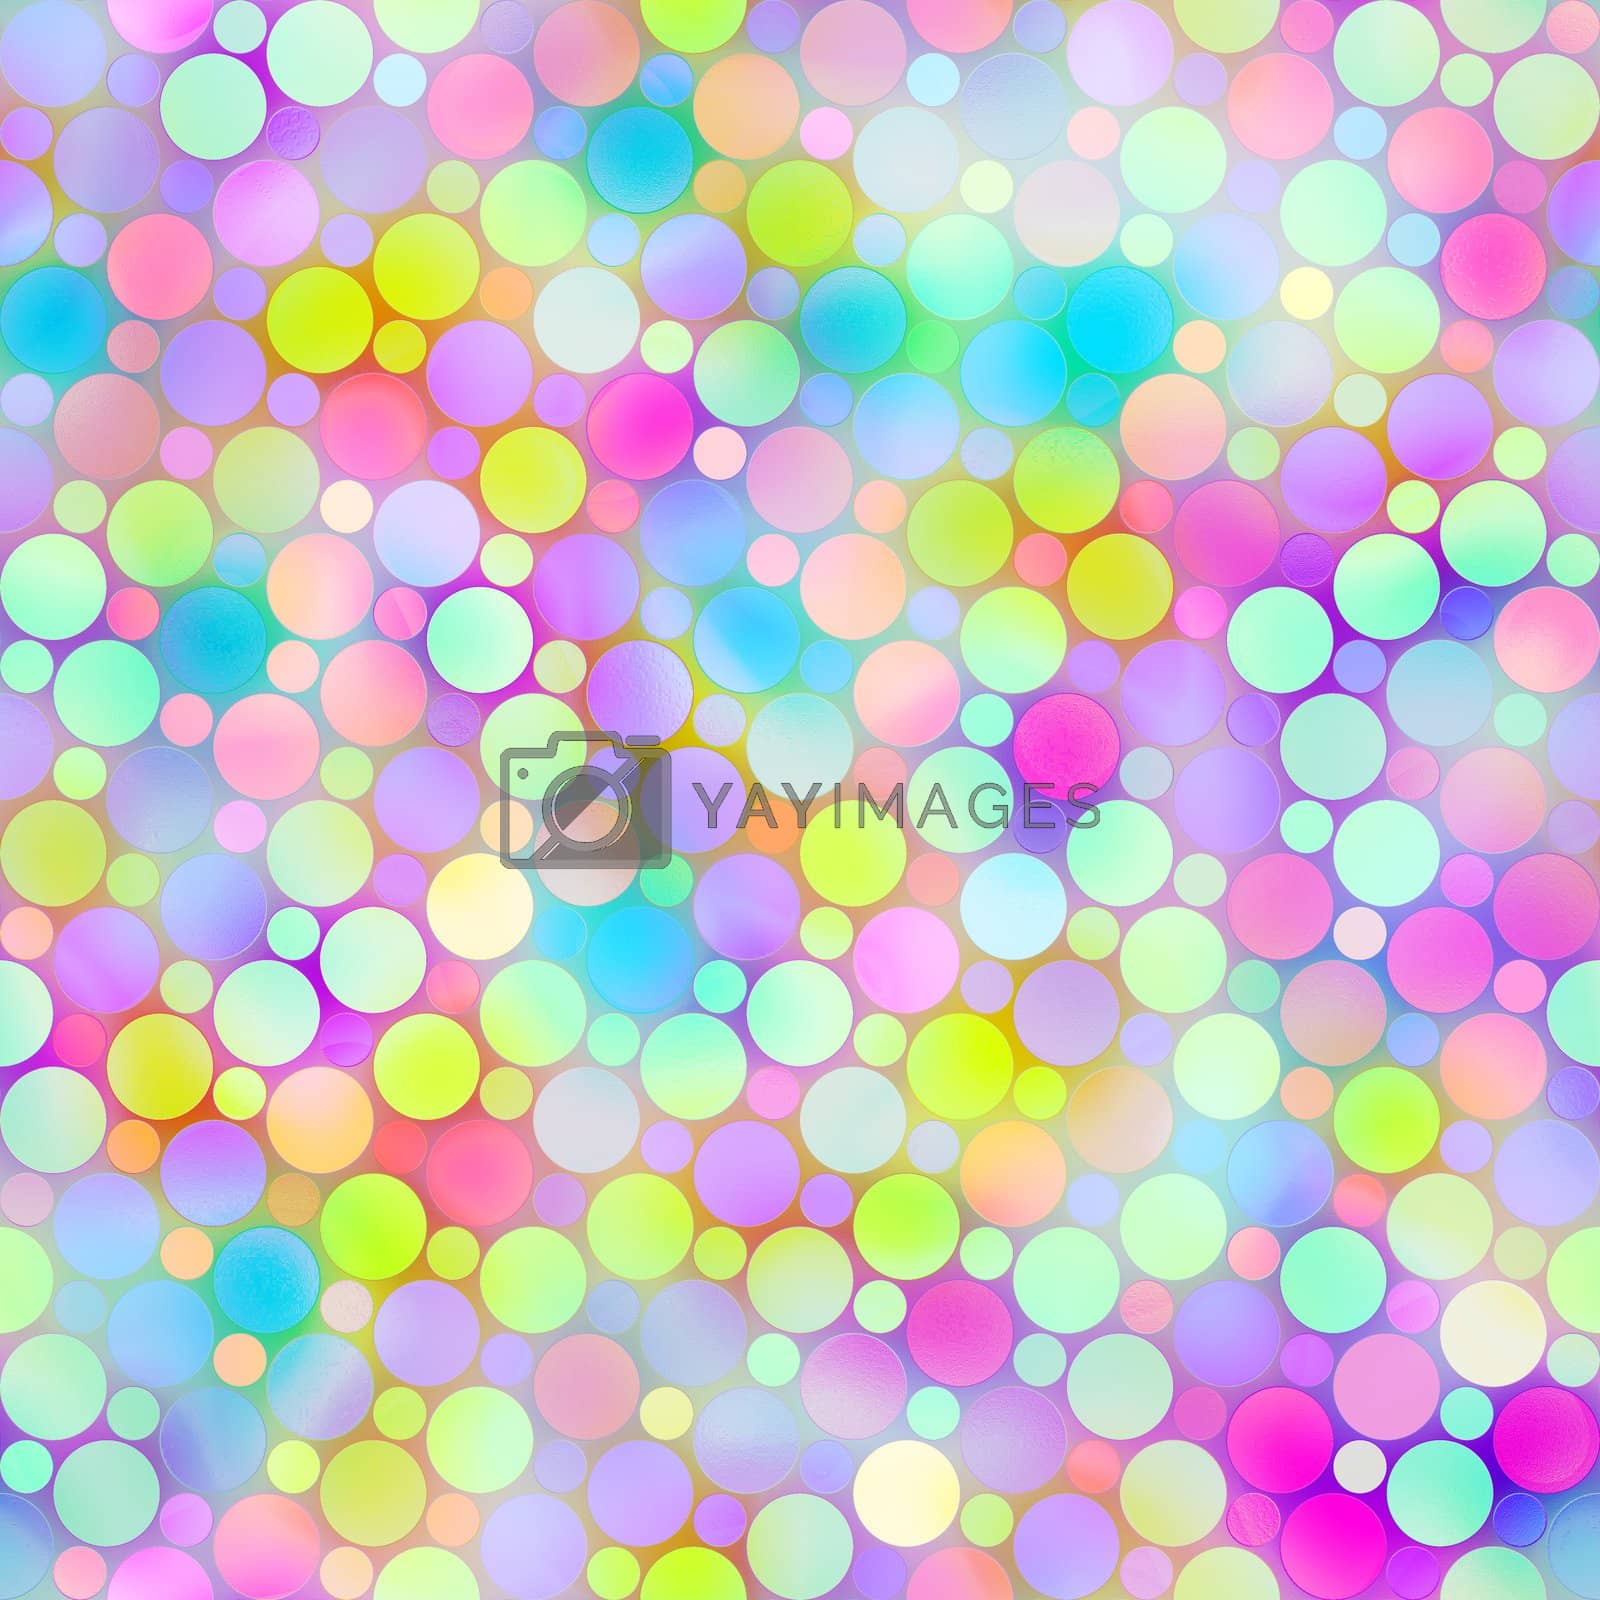 Royalty free image of festive bubbles pattern by weknow